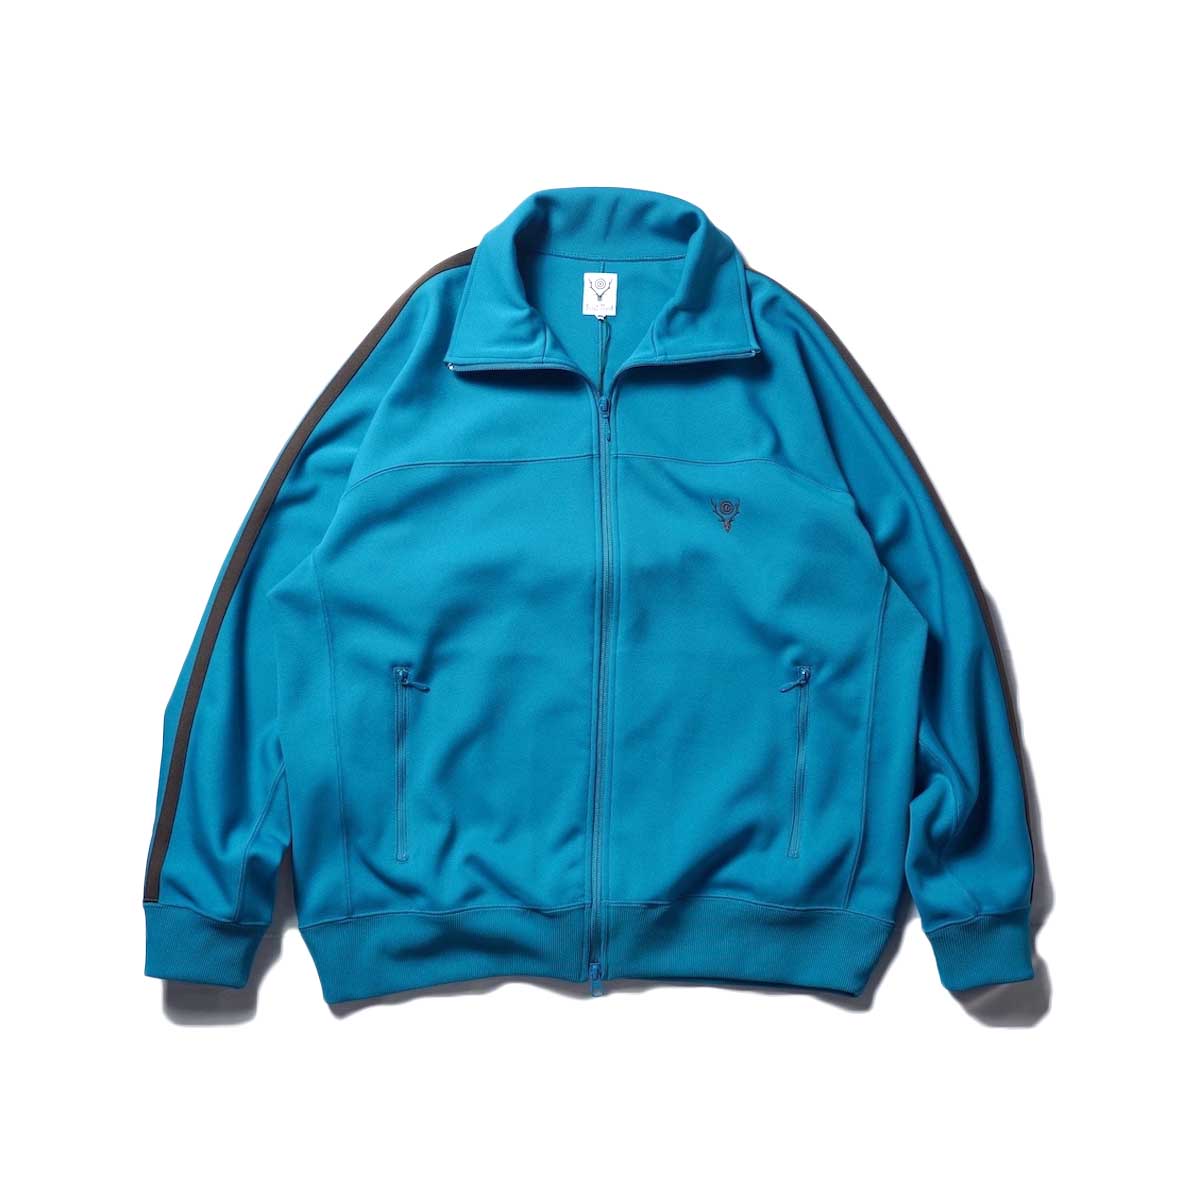 South2 West8 / Trainer Jacket-poly smooth (Turquoise)